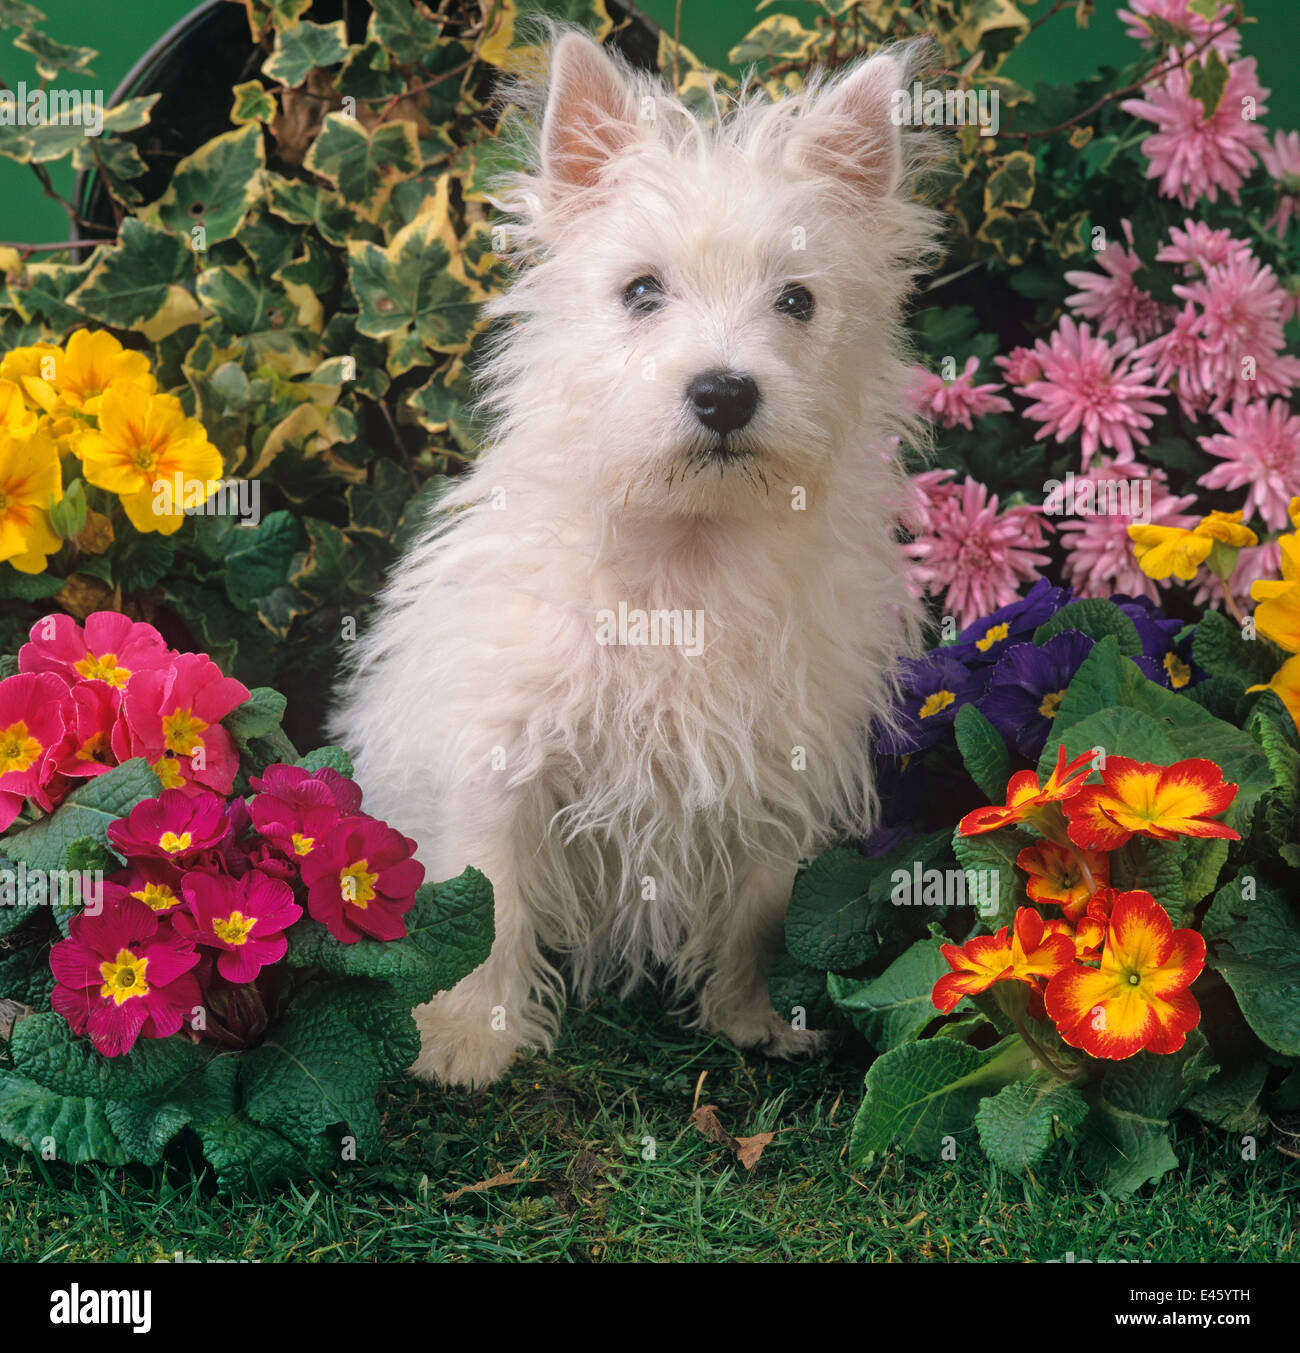 West highland terrier amongst cultivated garden flowers Stock Photo